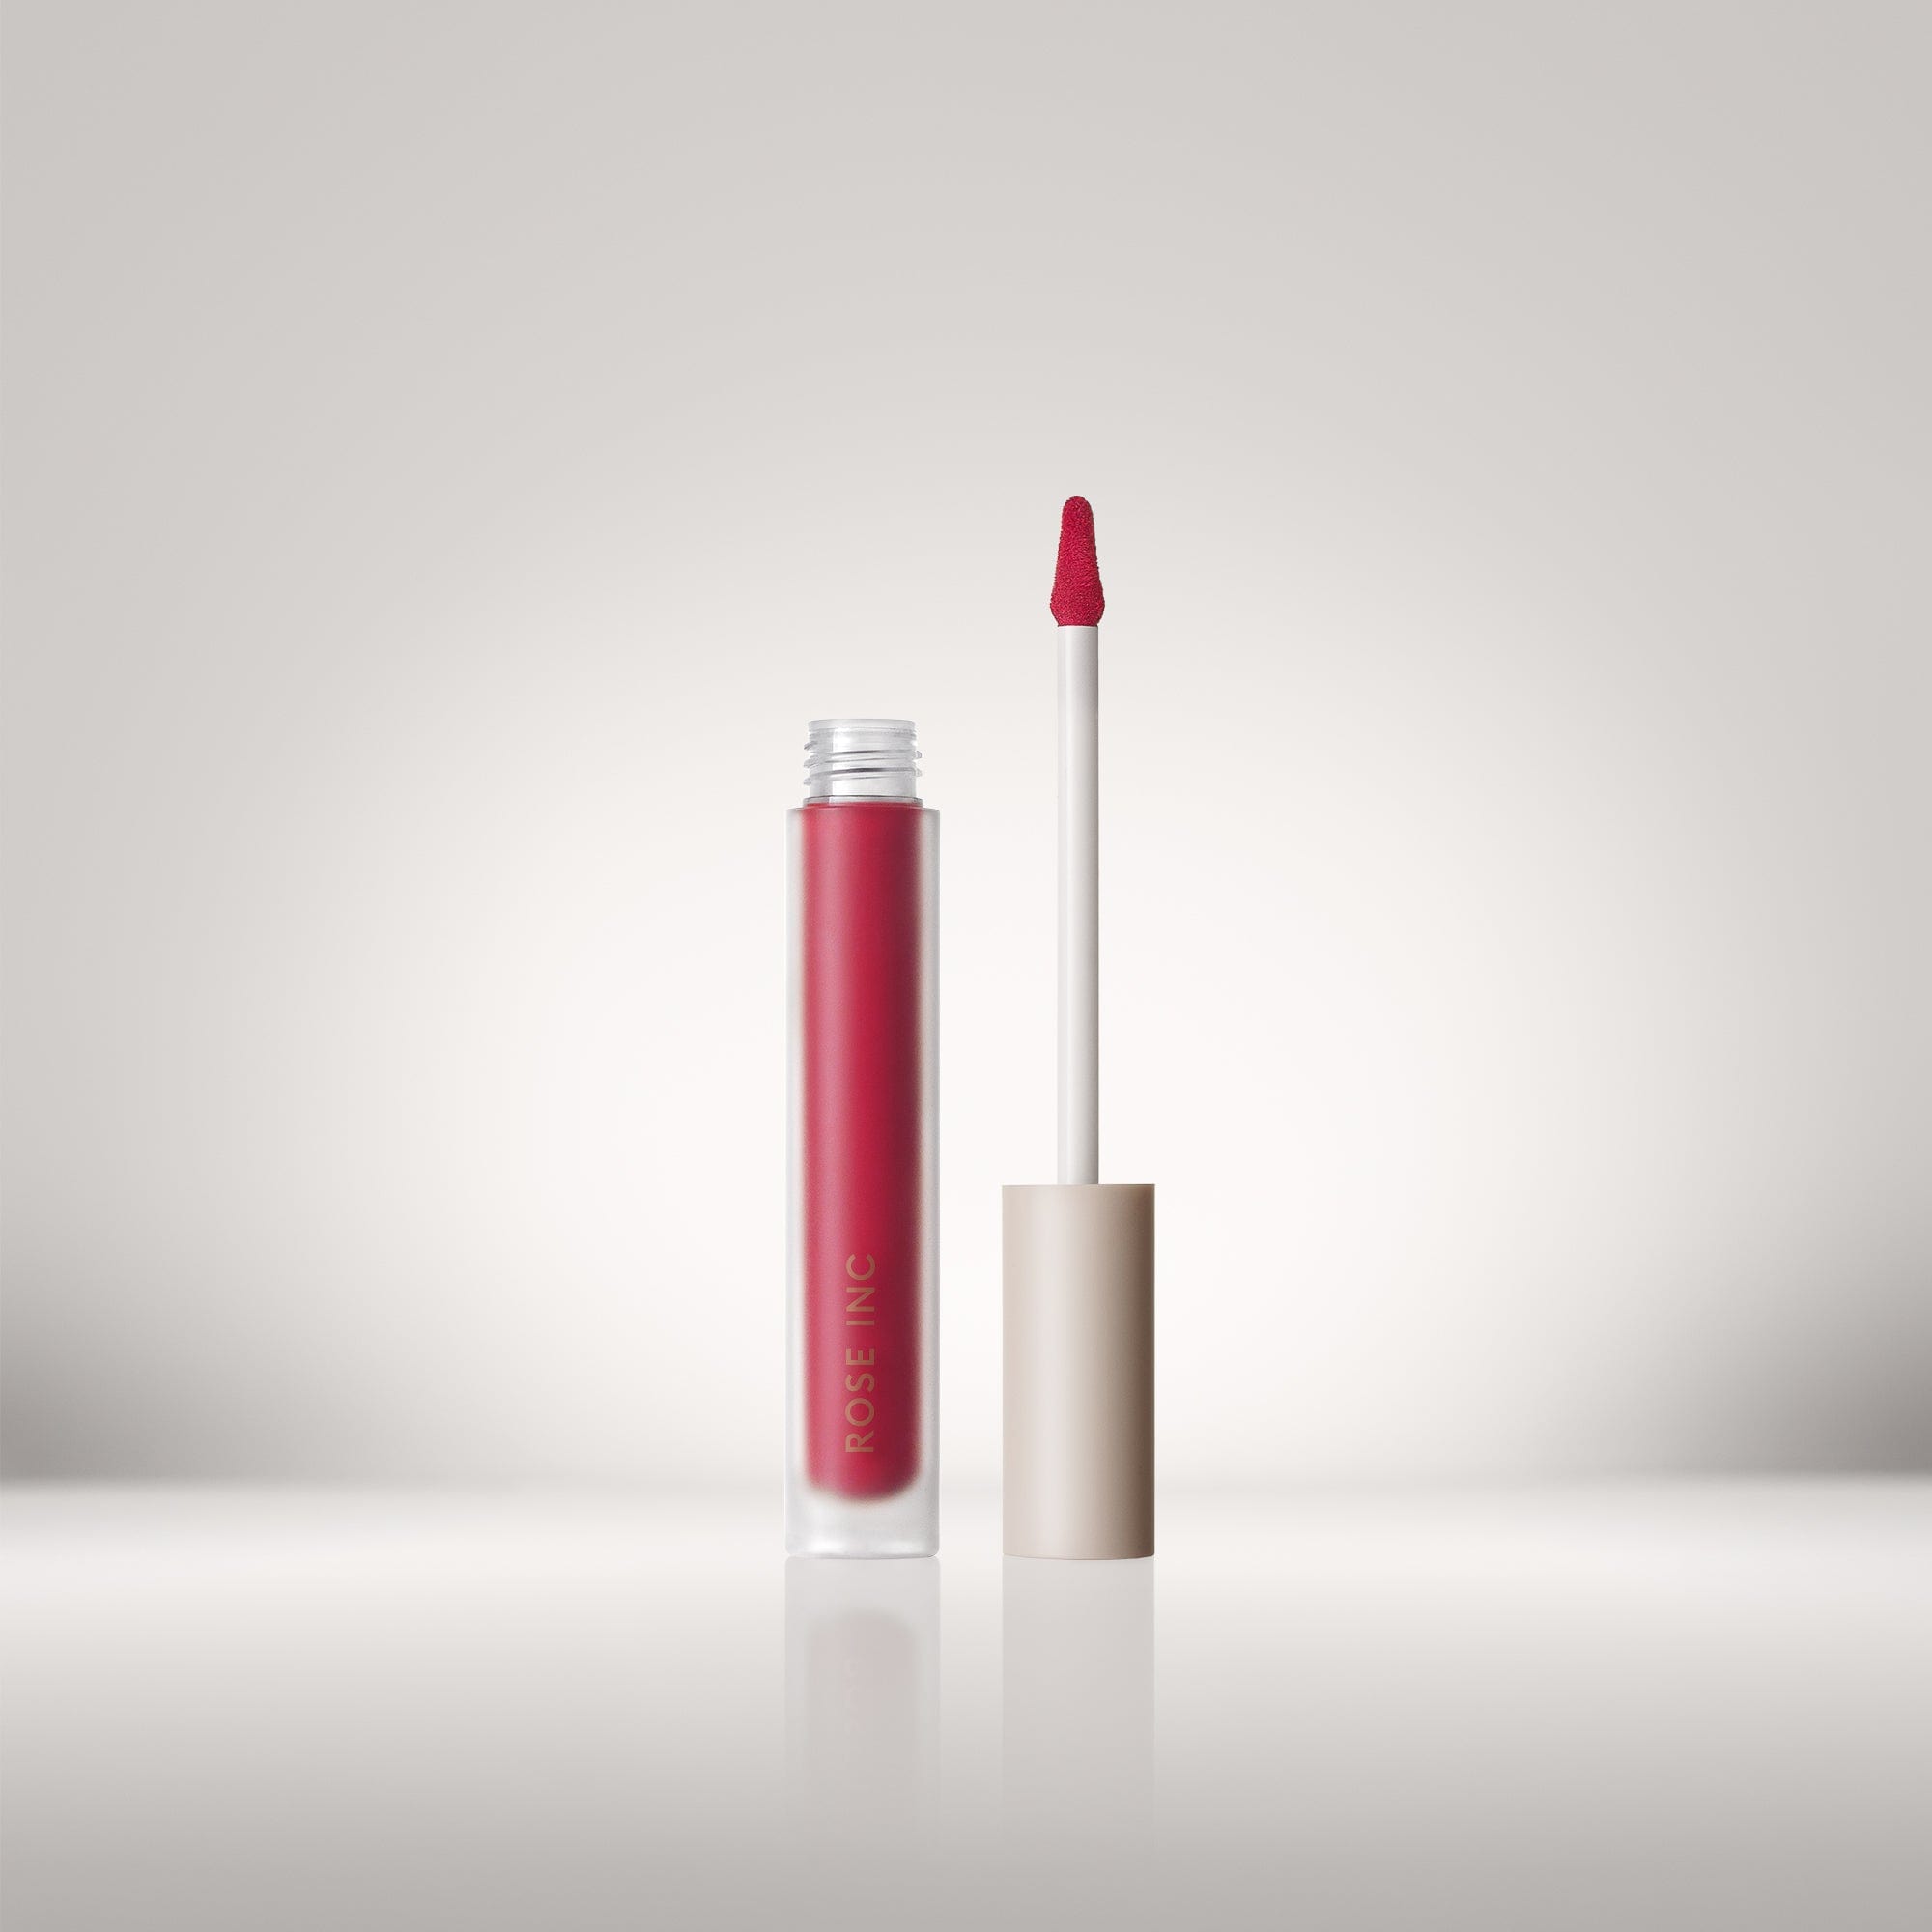 Lip Cream Weightless Matte Color is shade Of Stars.